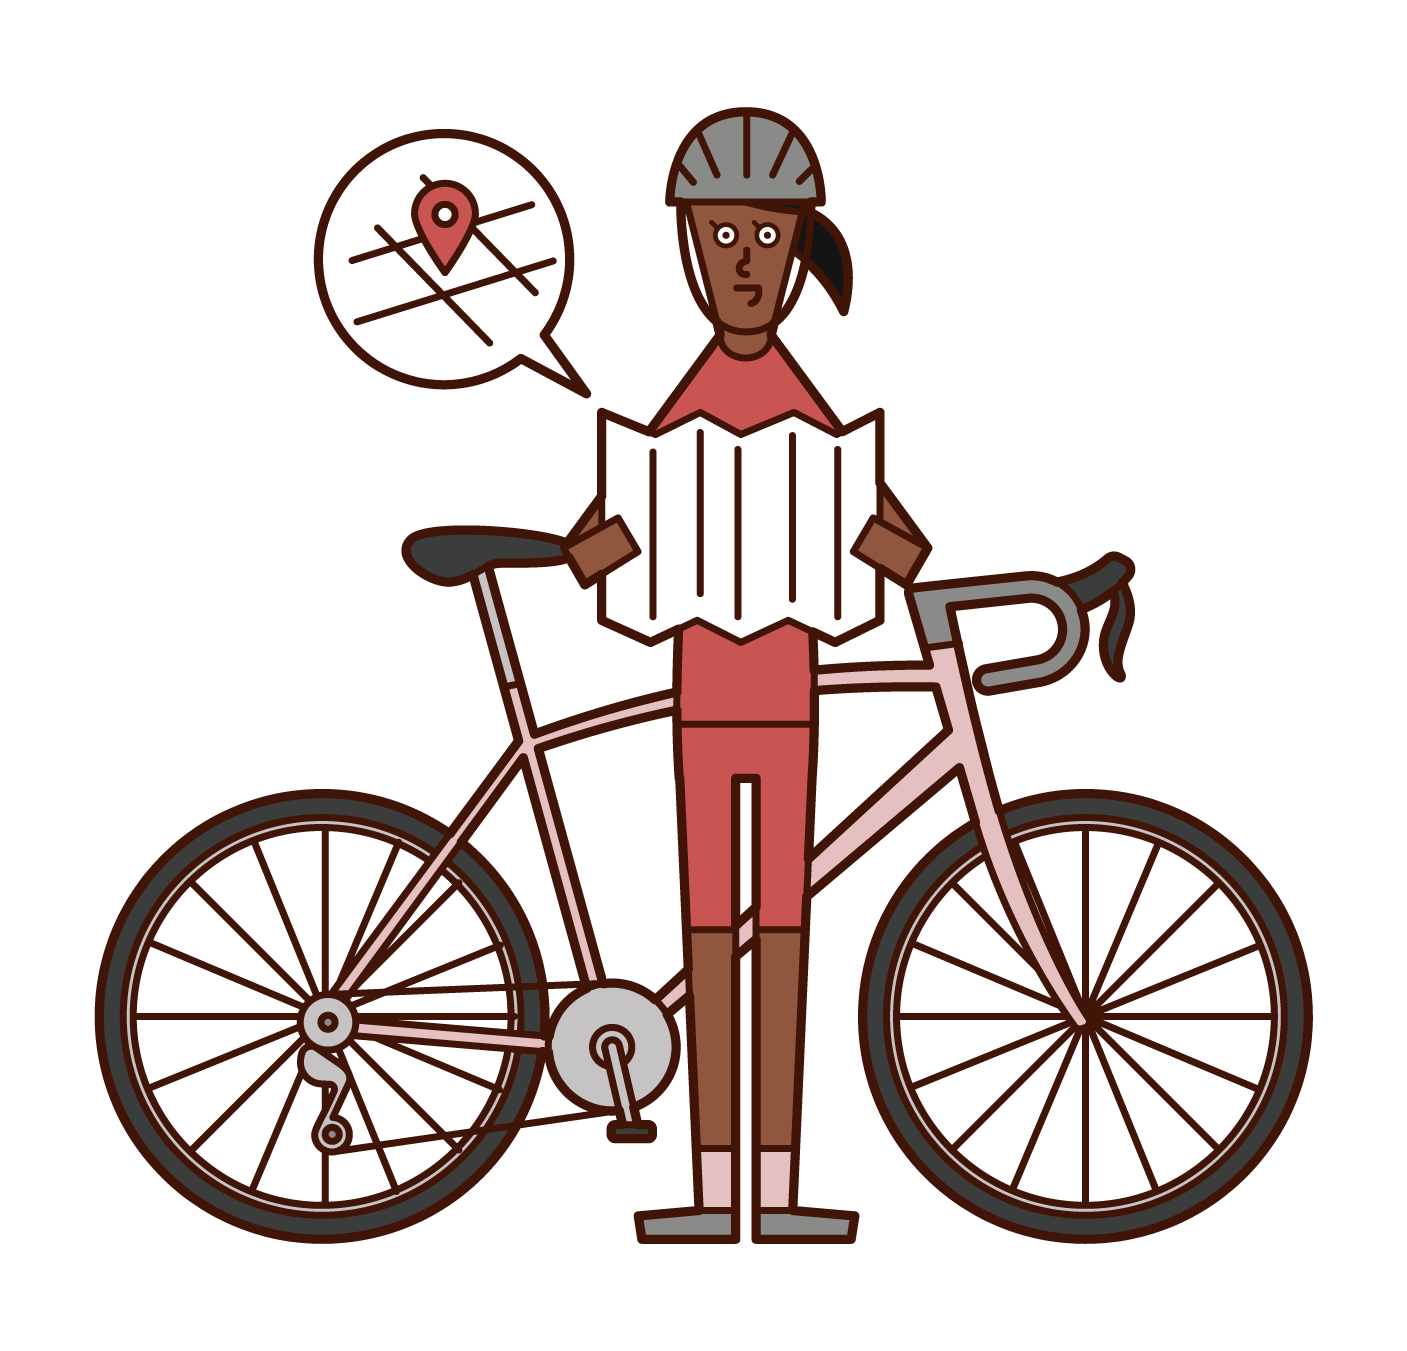 Illustration of a bicycle rider (woman) looking out at the map